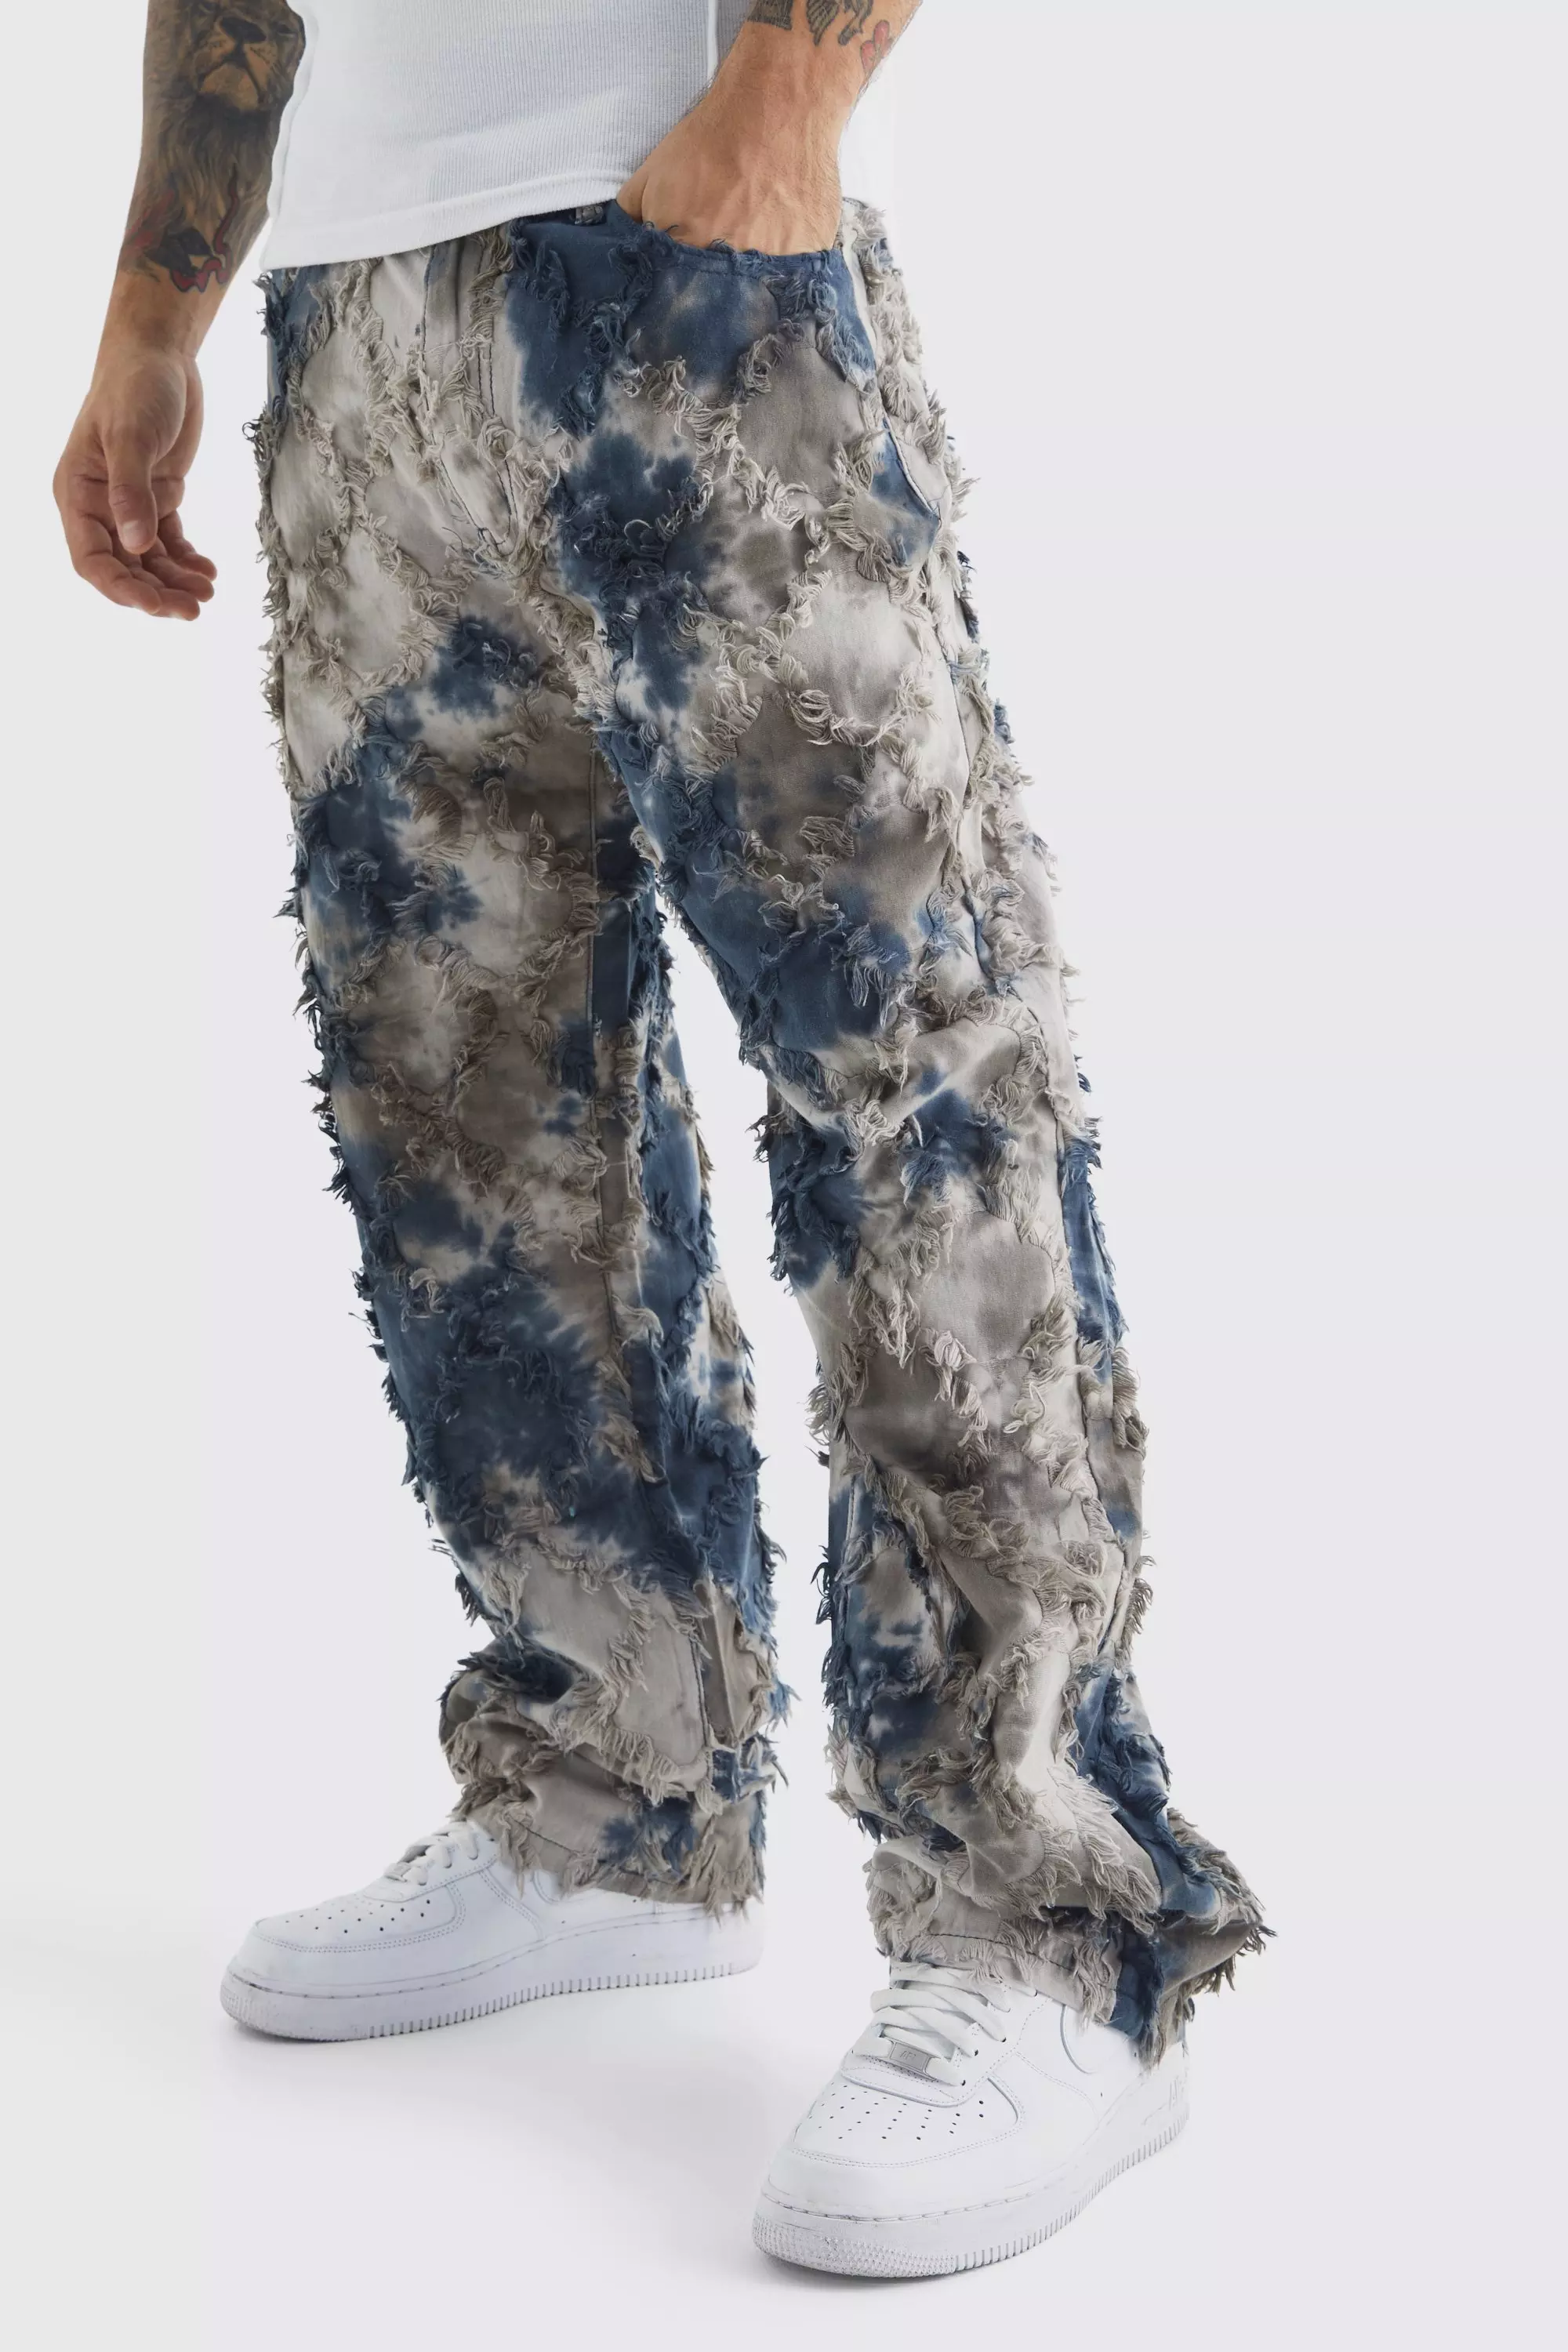 Charcoal Grey Fixed Waist Oil Camo Tapestry Pants